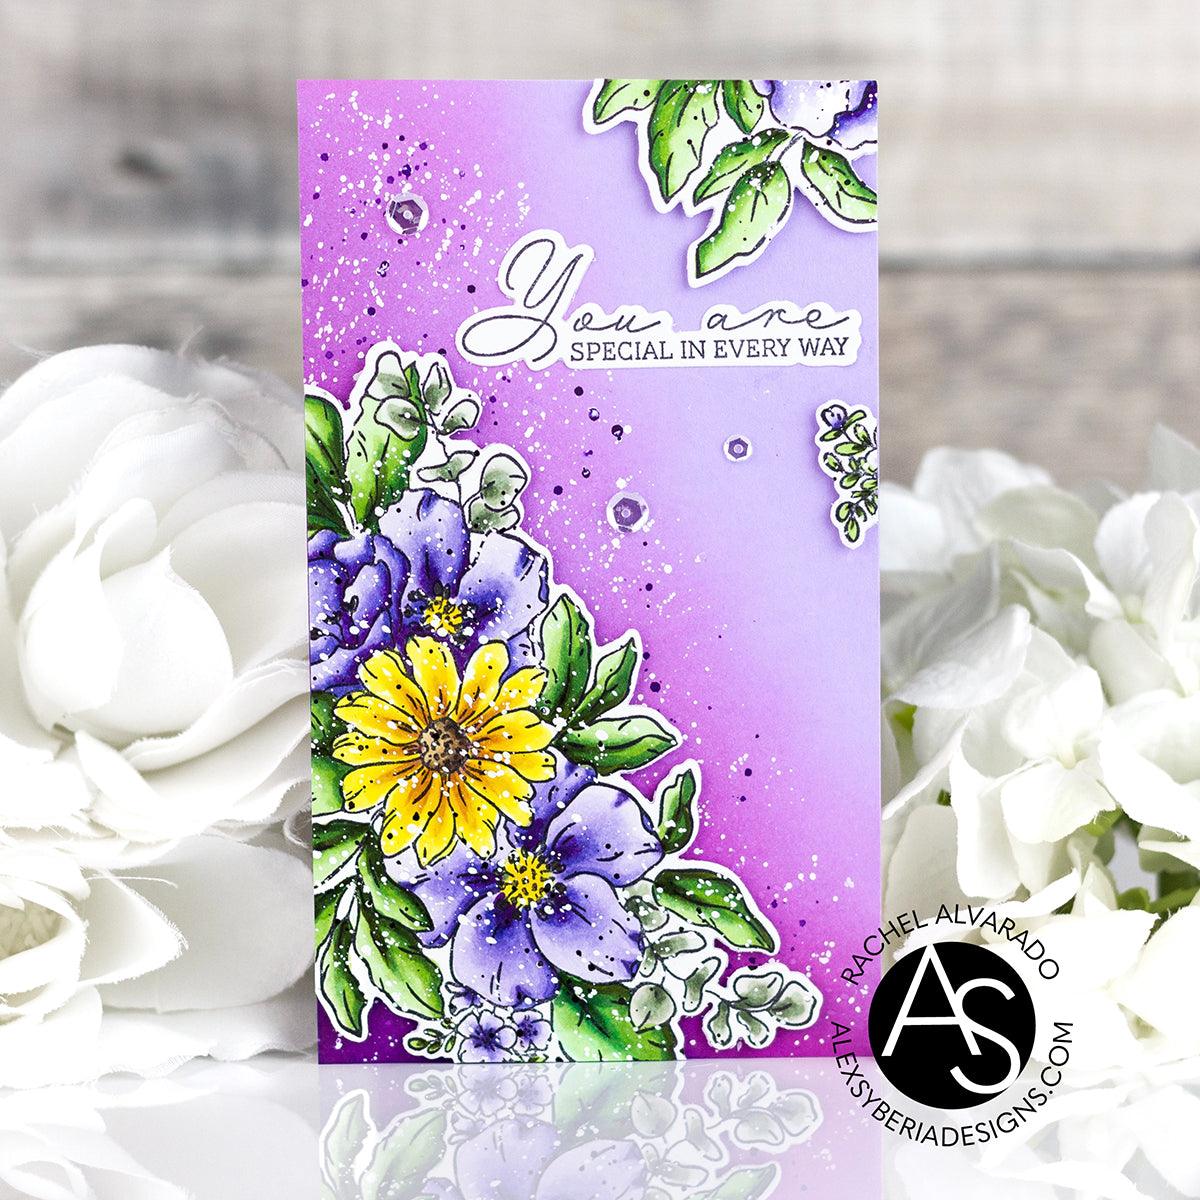 life-is-good-stamp-set-alex-syberia-designs-bouquet-coloring-cardmaking-tutorial-floral-card-famous-cardmaking-brands-copic-coloring-handmadecards-stencils-embossing-die-cover-stripes-layering-stamp